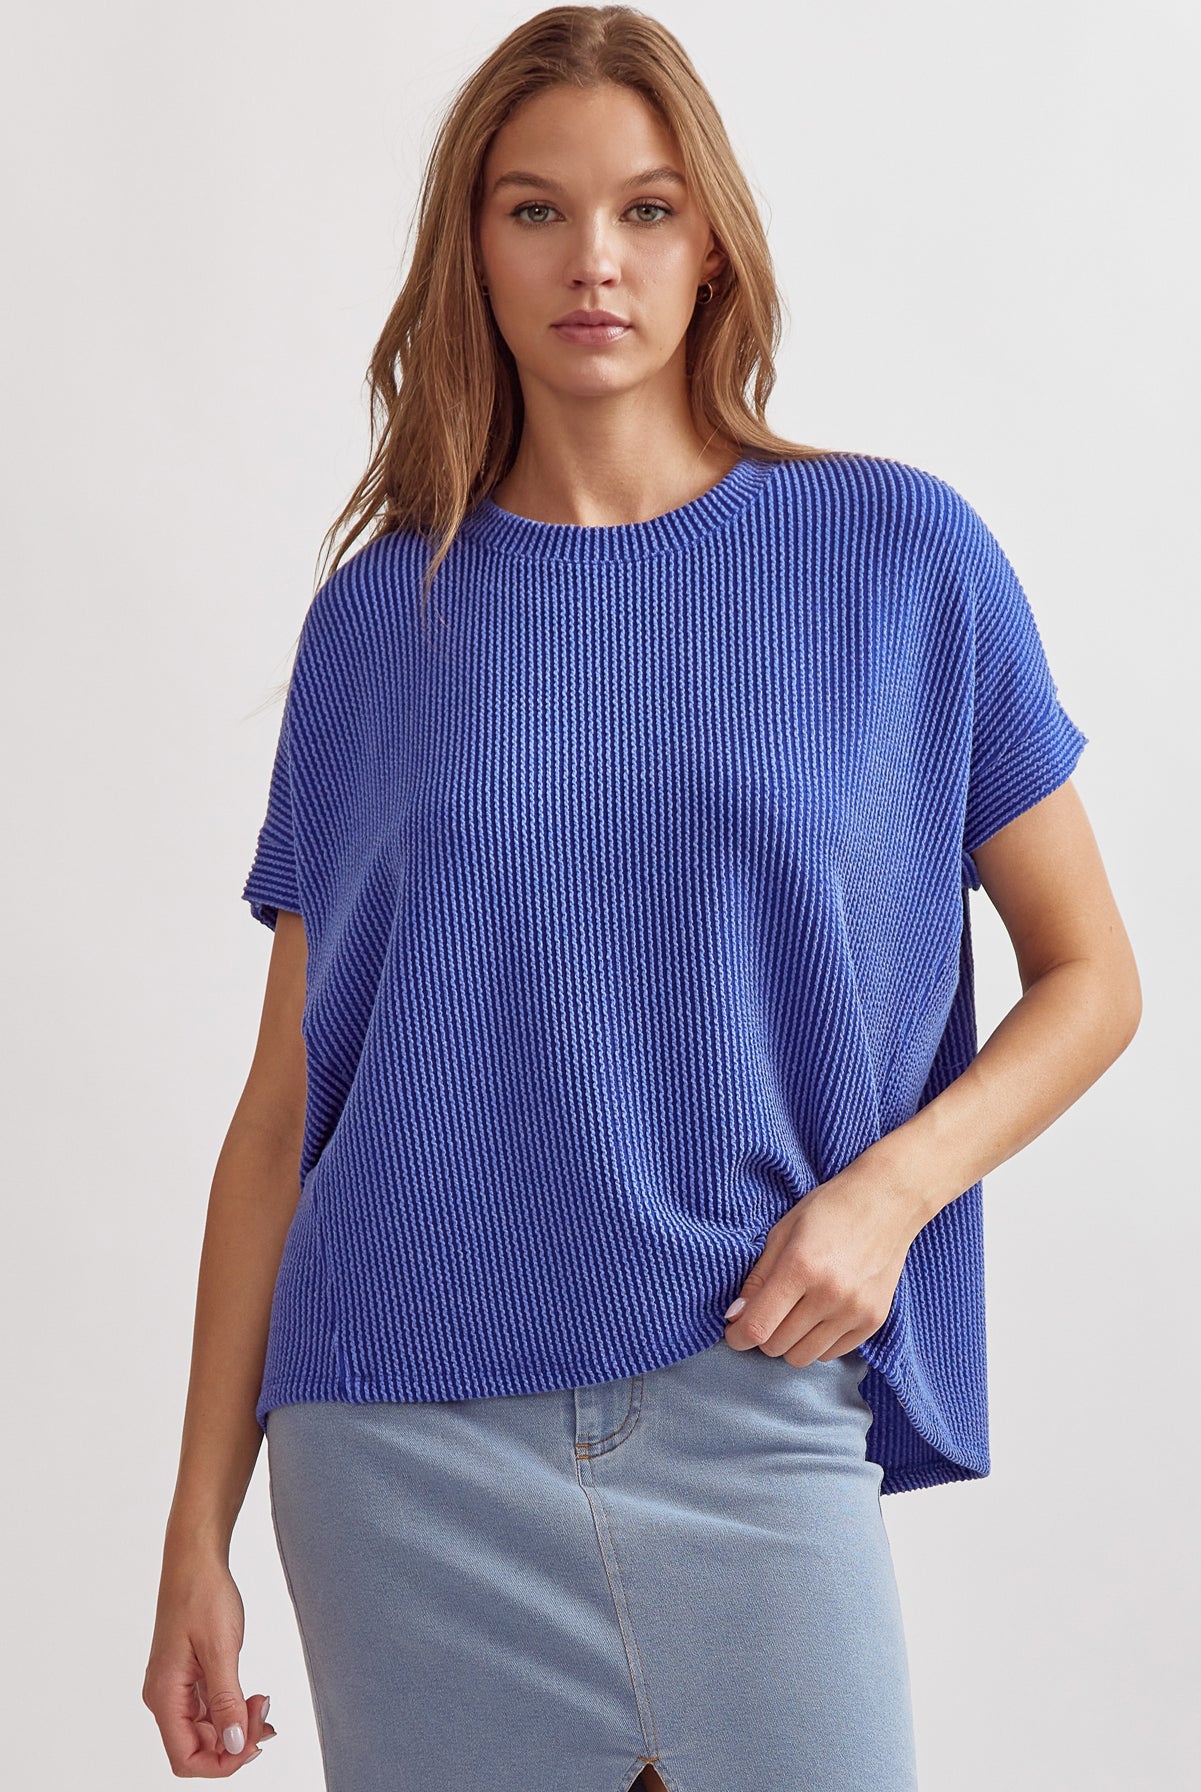 Eleanor Ribbed Short Sleeve Top - Be You Boutique